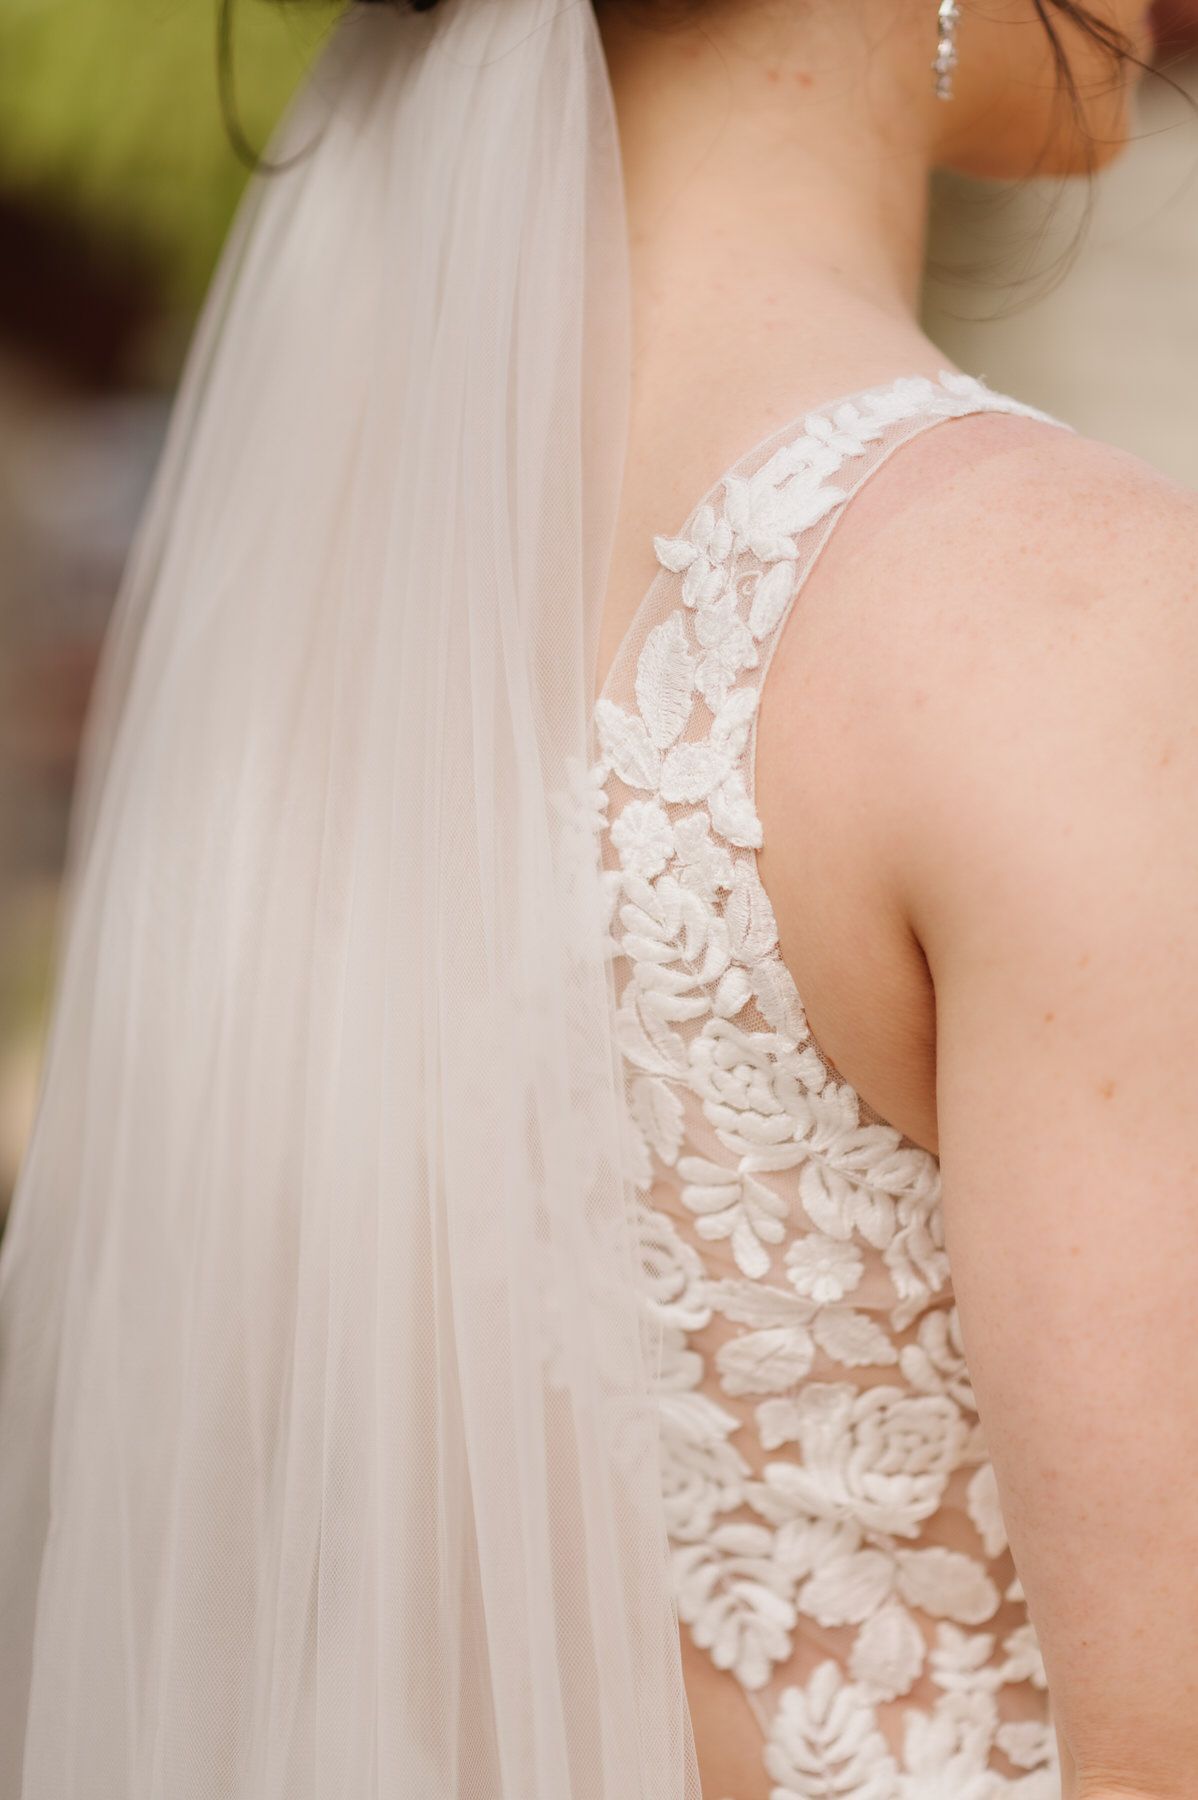 The back of a bride wearing a wedding dress and veil.